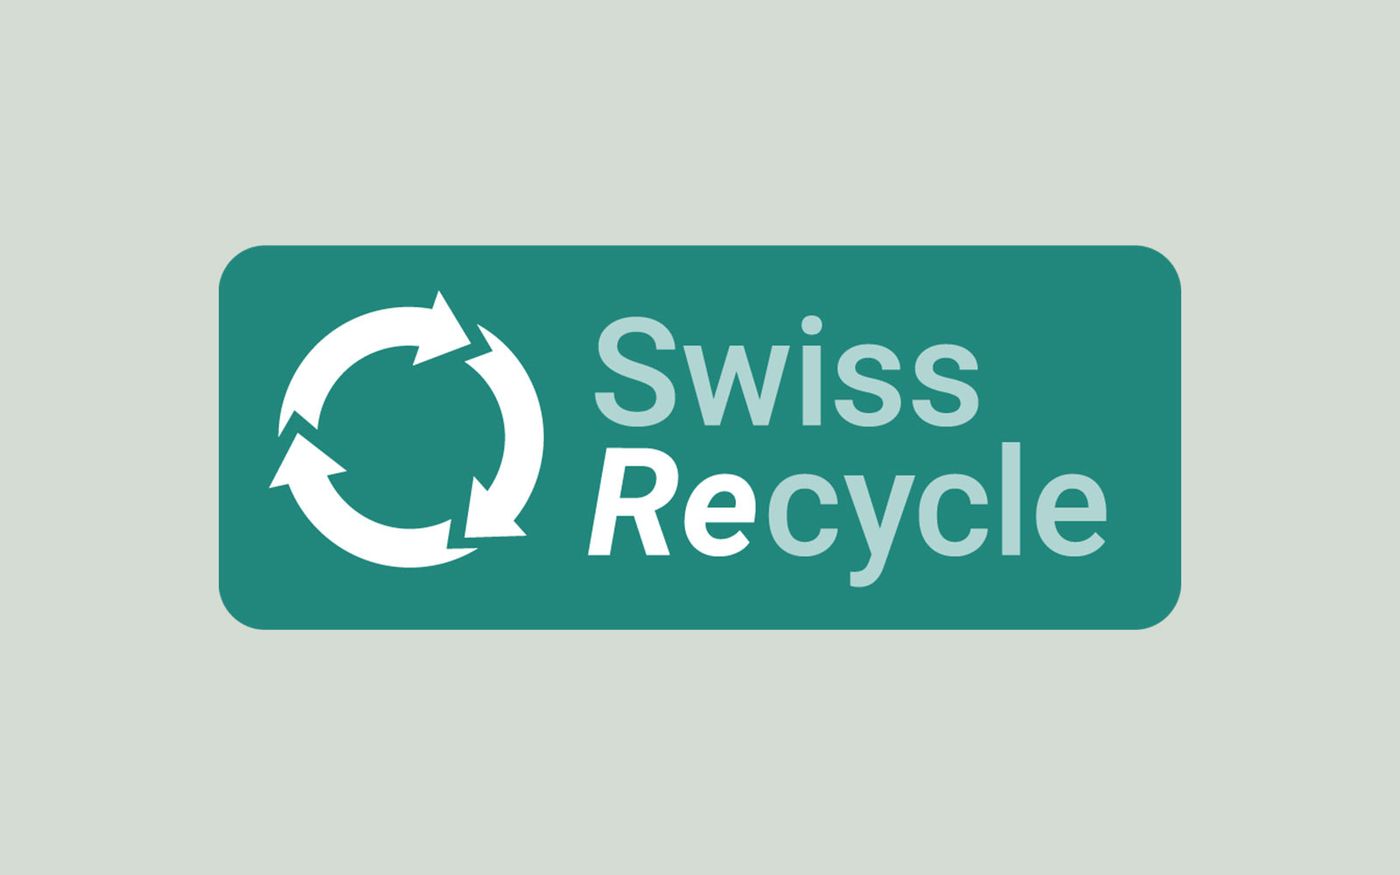 Swiss Recycling devient Swiss Recycle